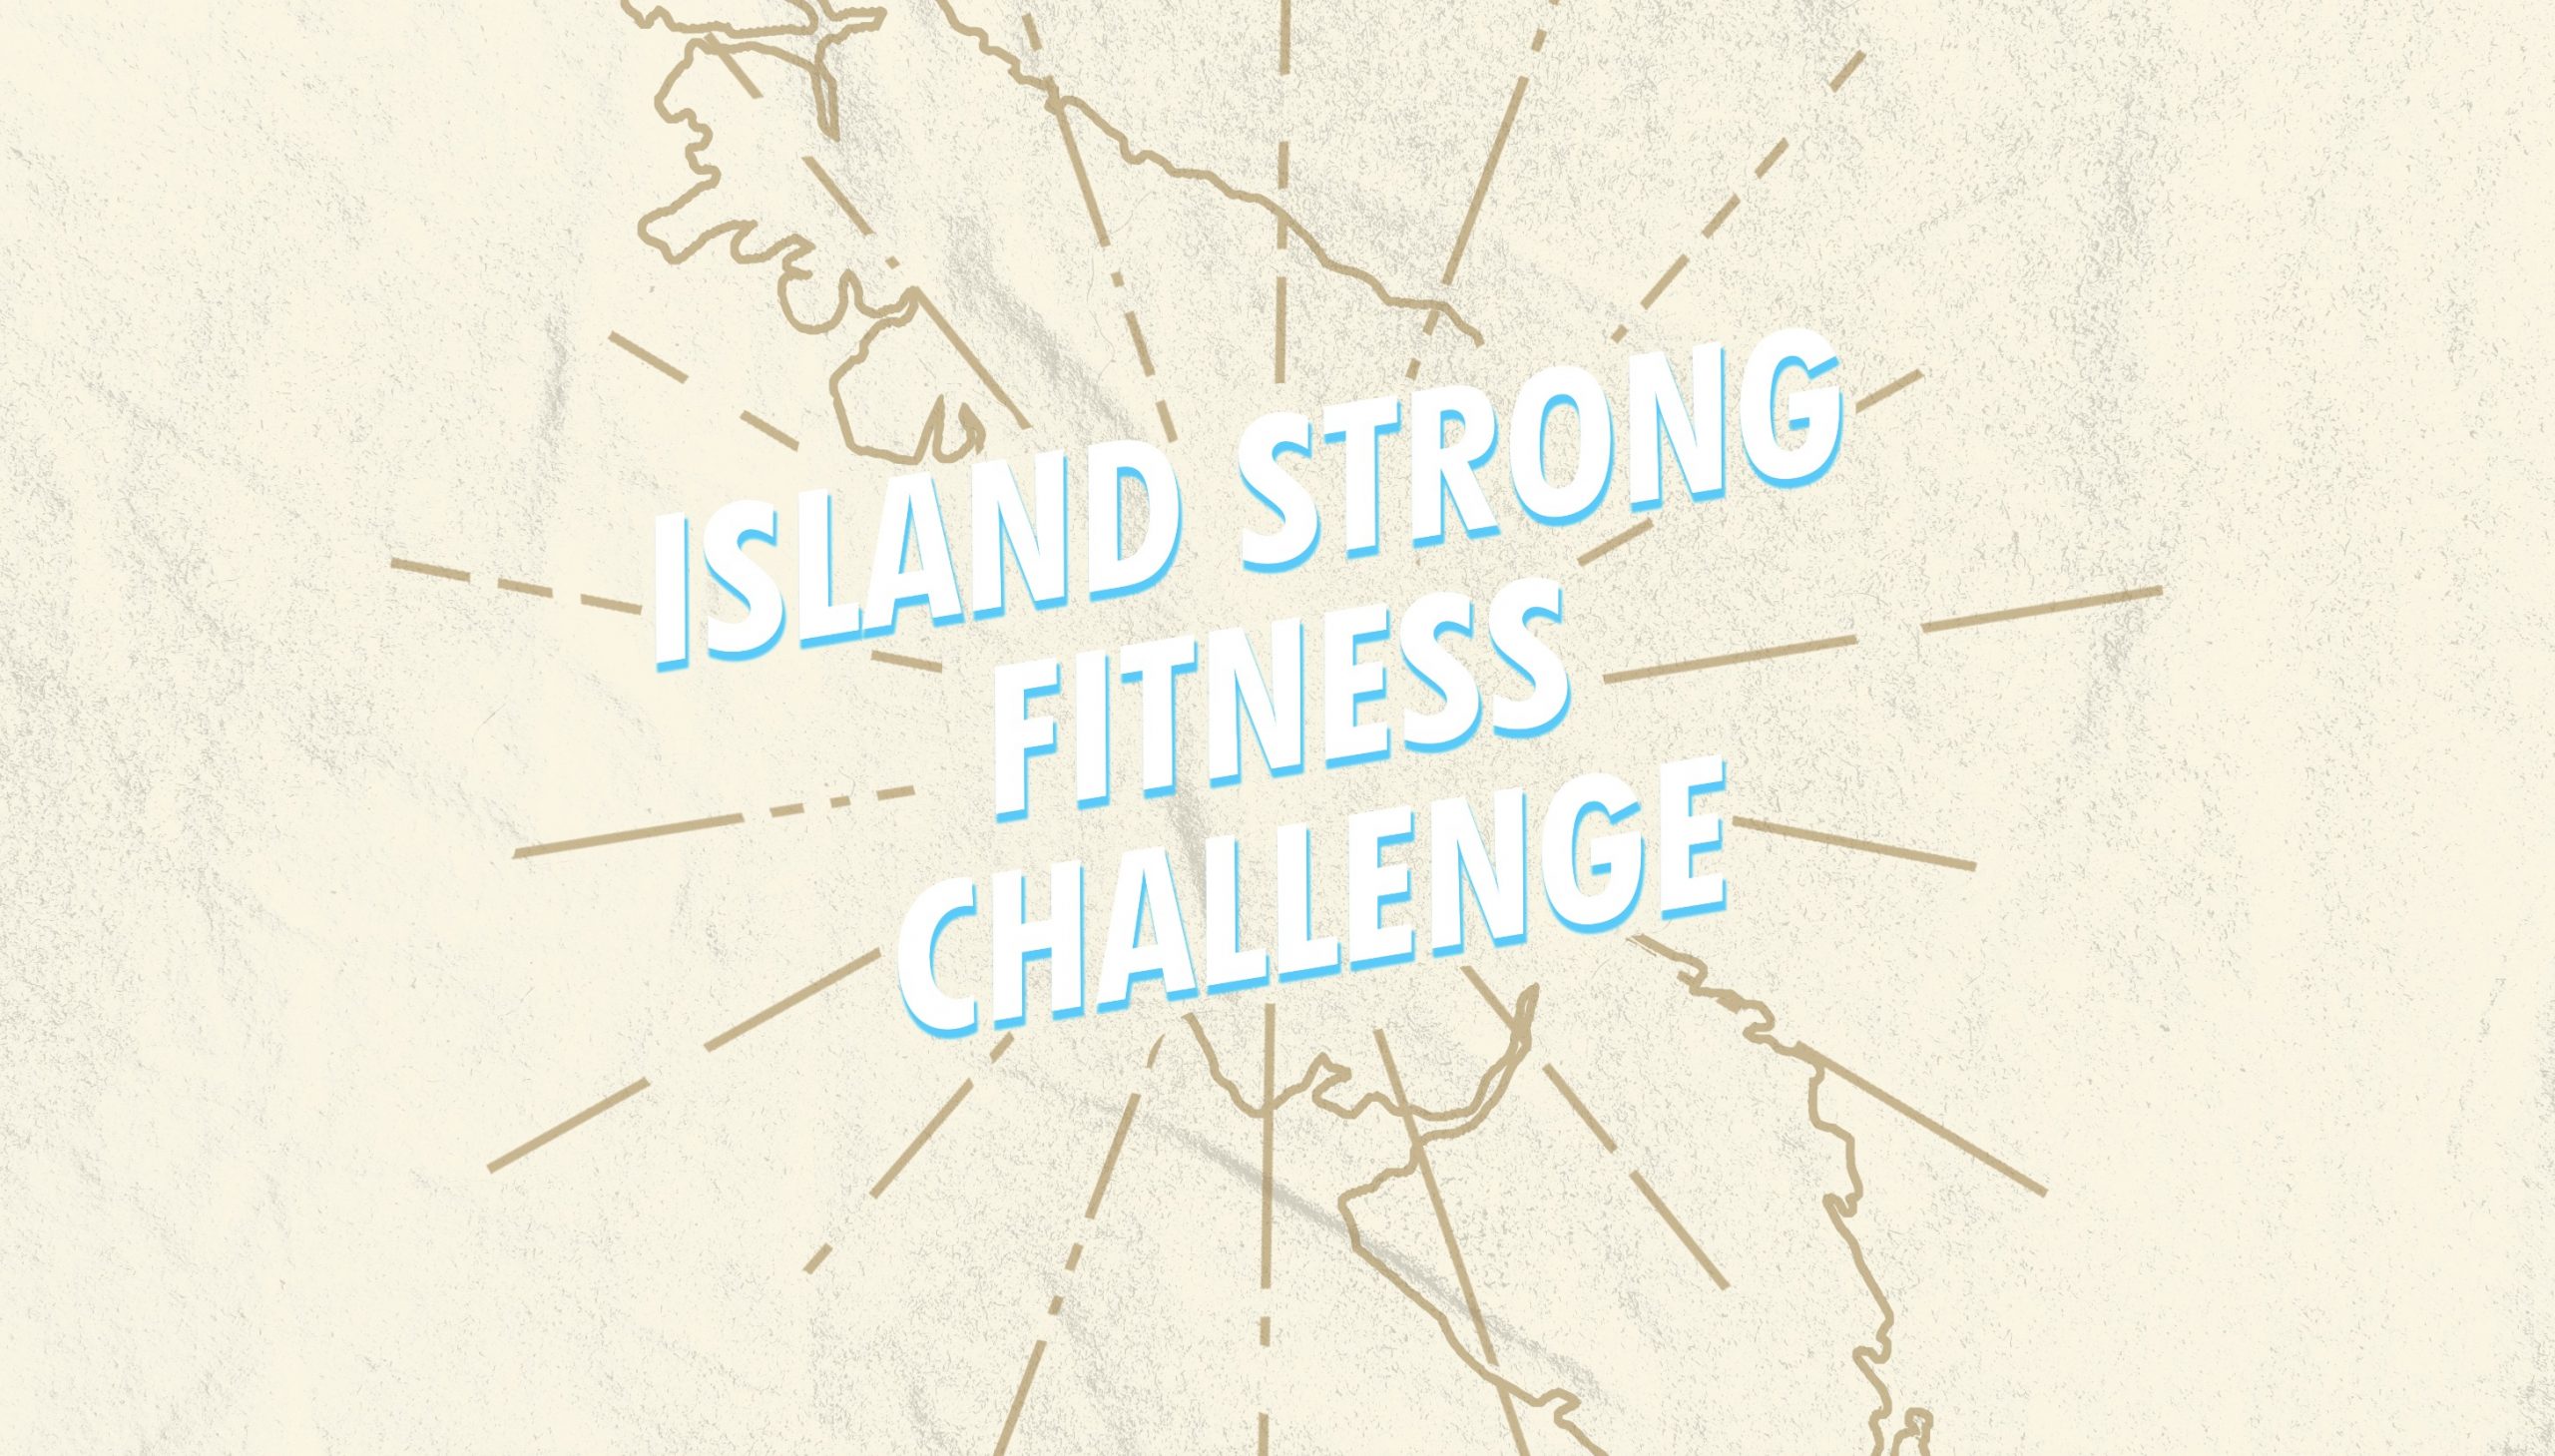 Island Strong Fitness Challenge logo over outline of Vancouver Island